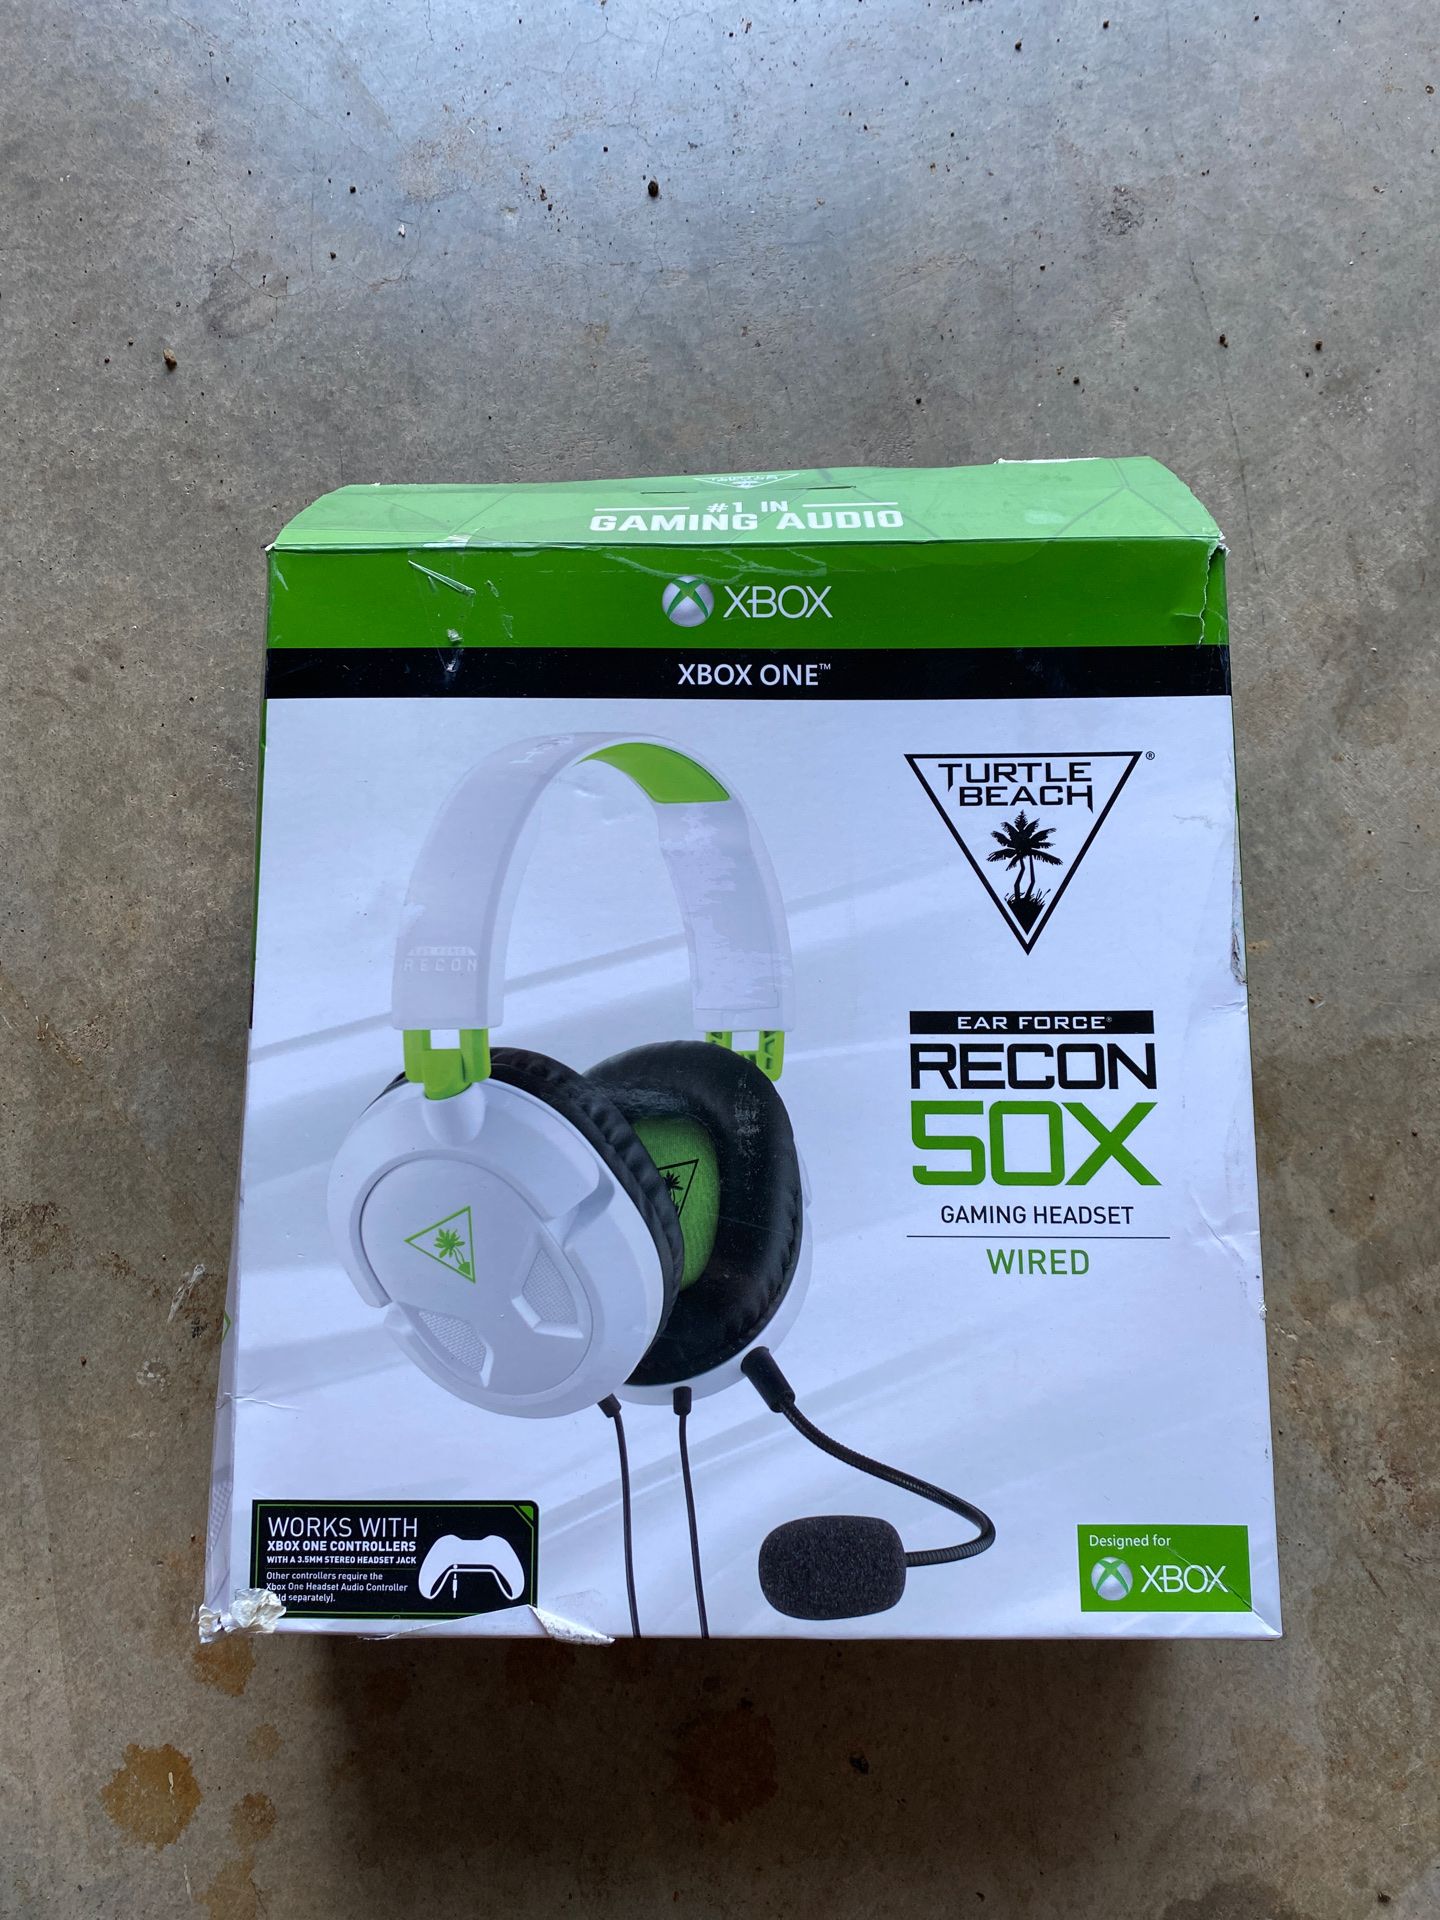 Turtle beach recon 50x gaming headset.